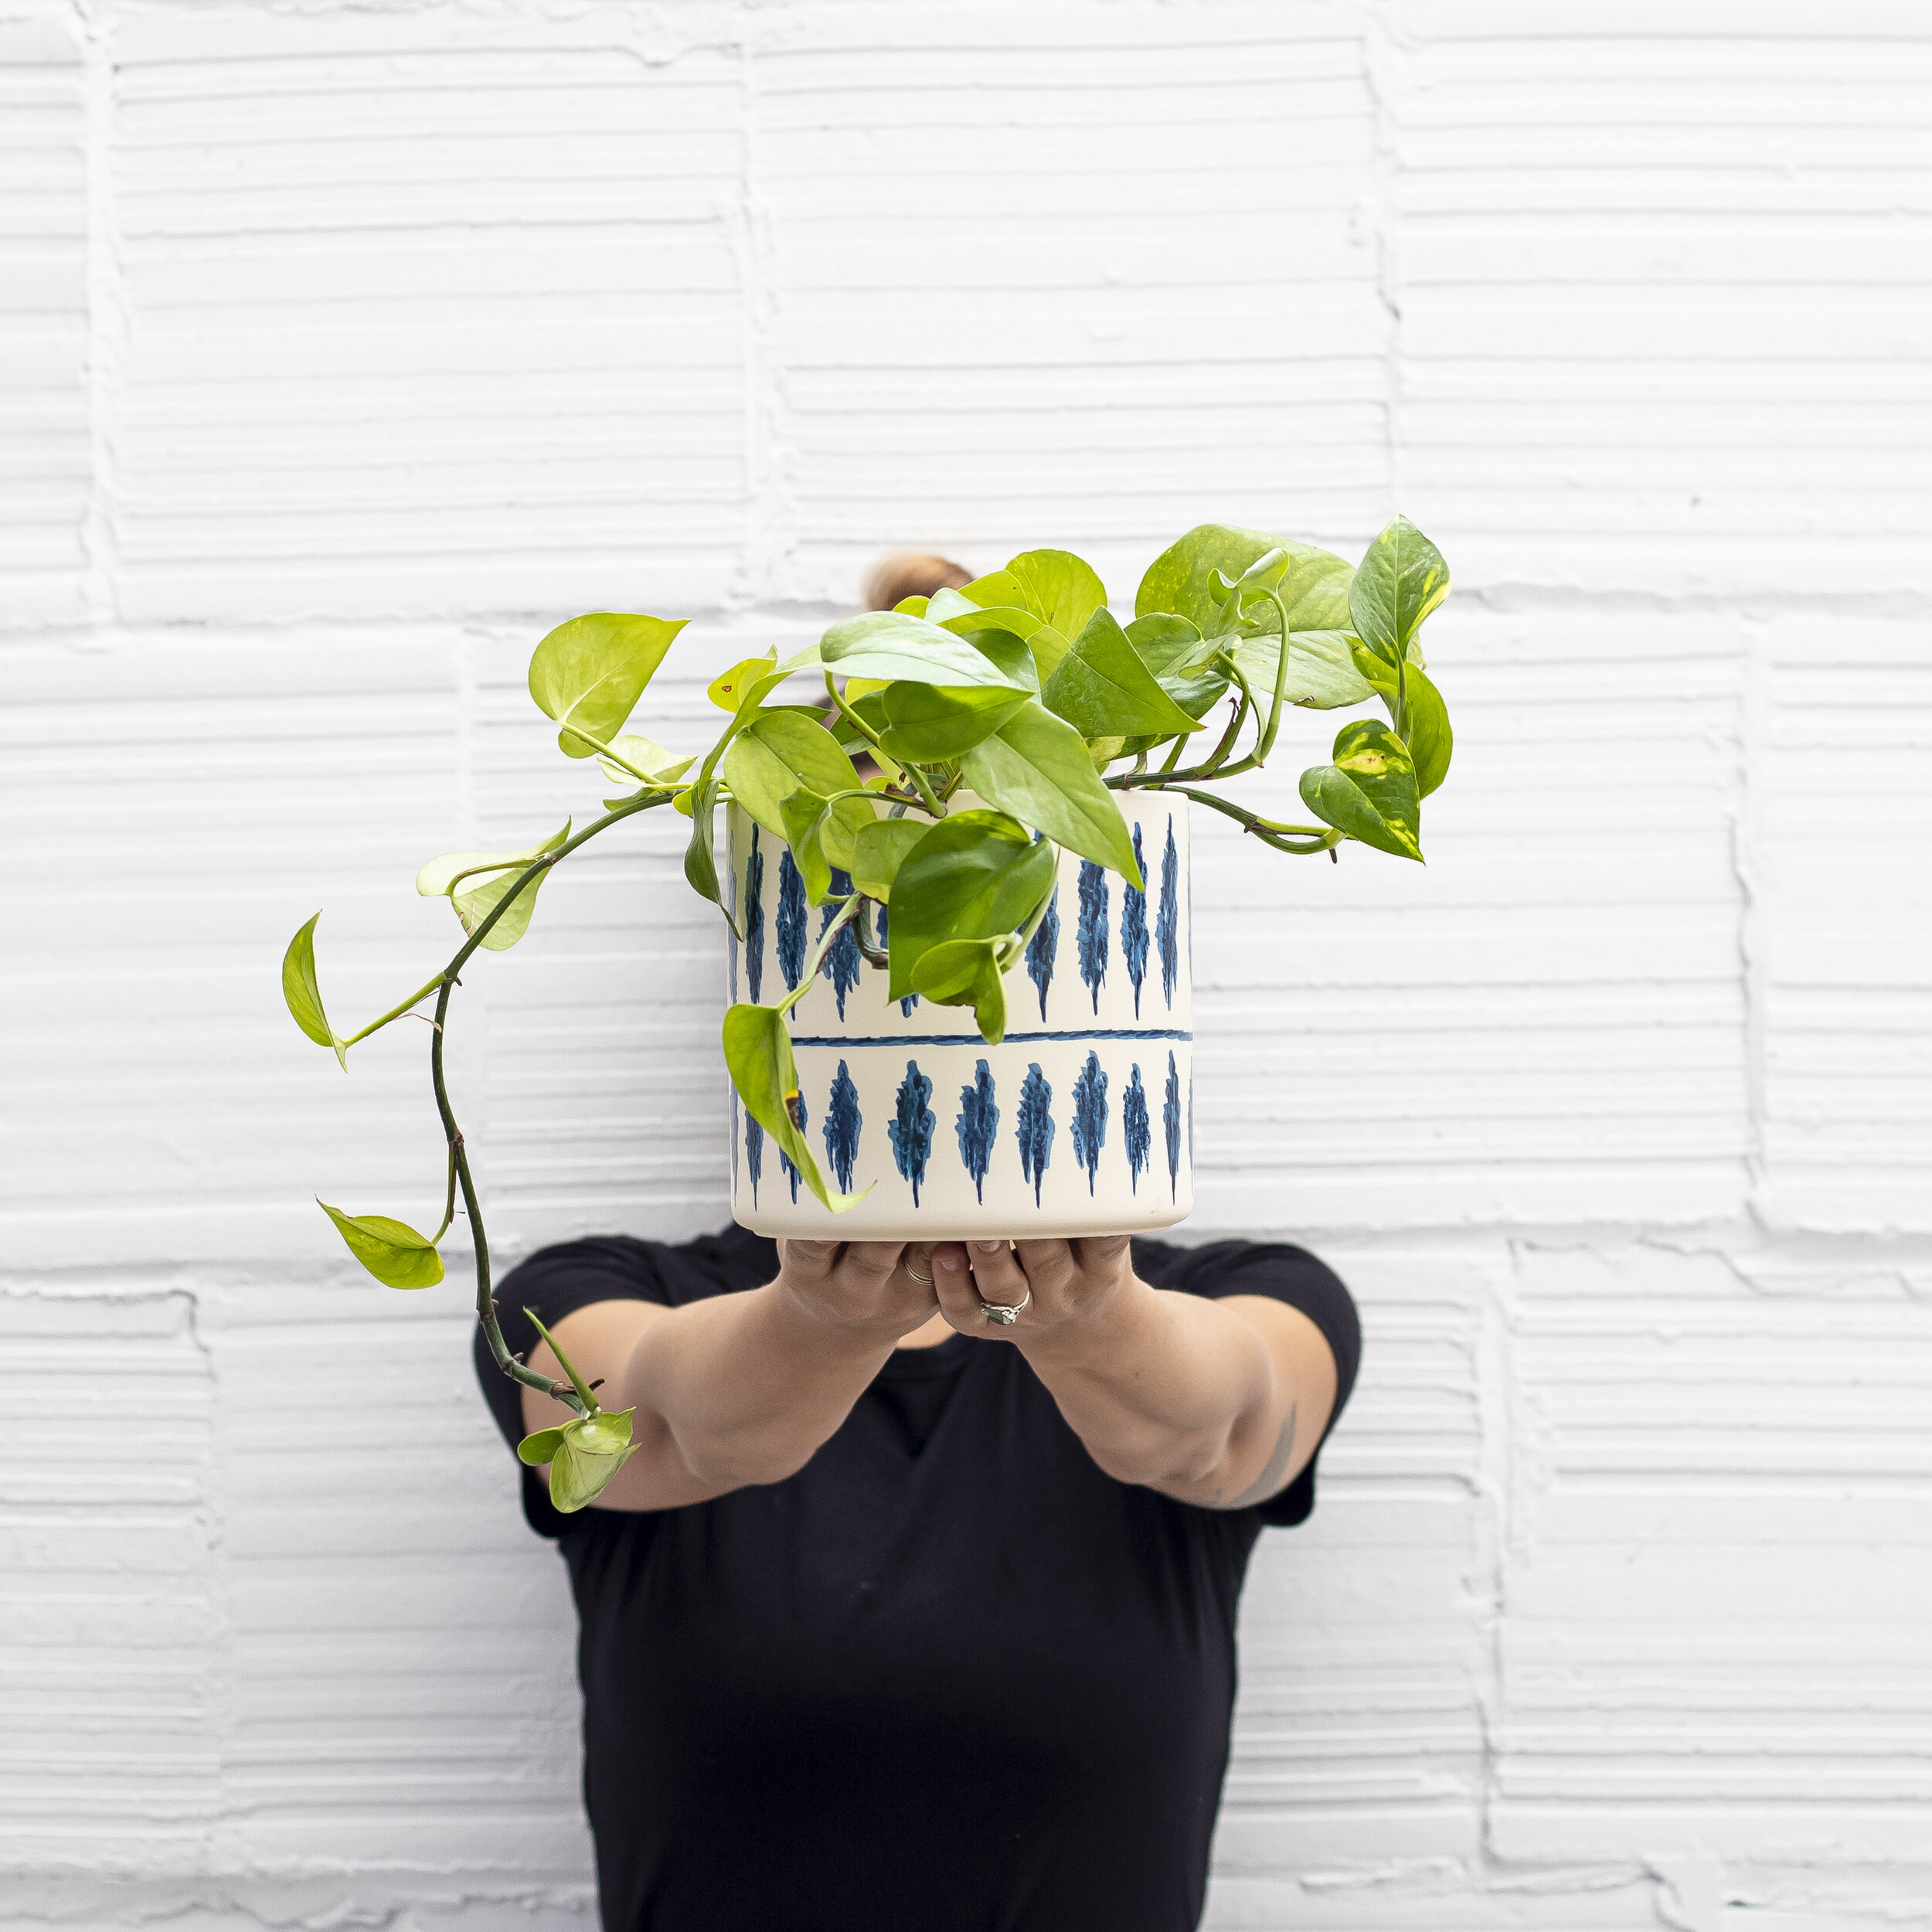 A green Pothos plant in a white and navy blue patterned pot being held up by a person in front of a white concrete wall